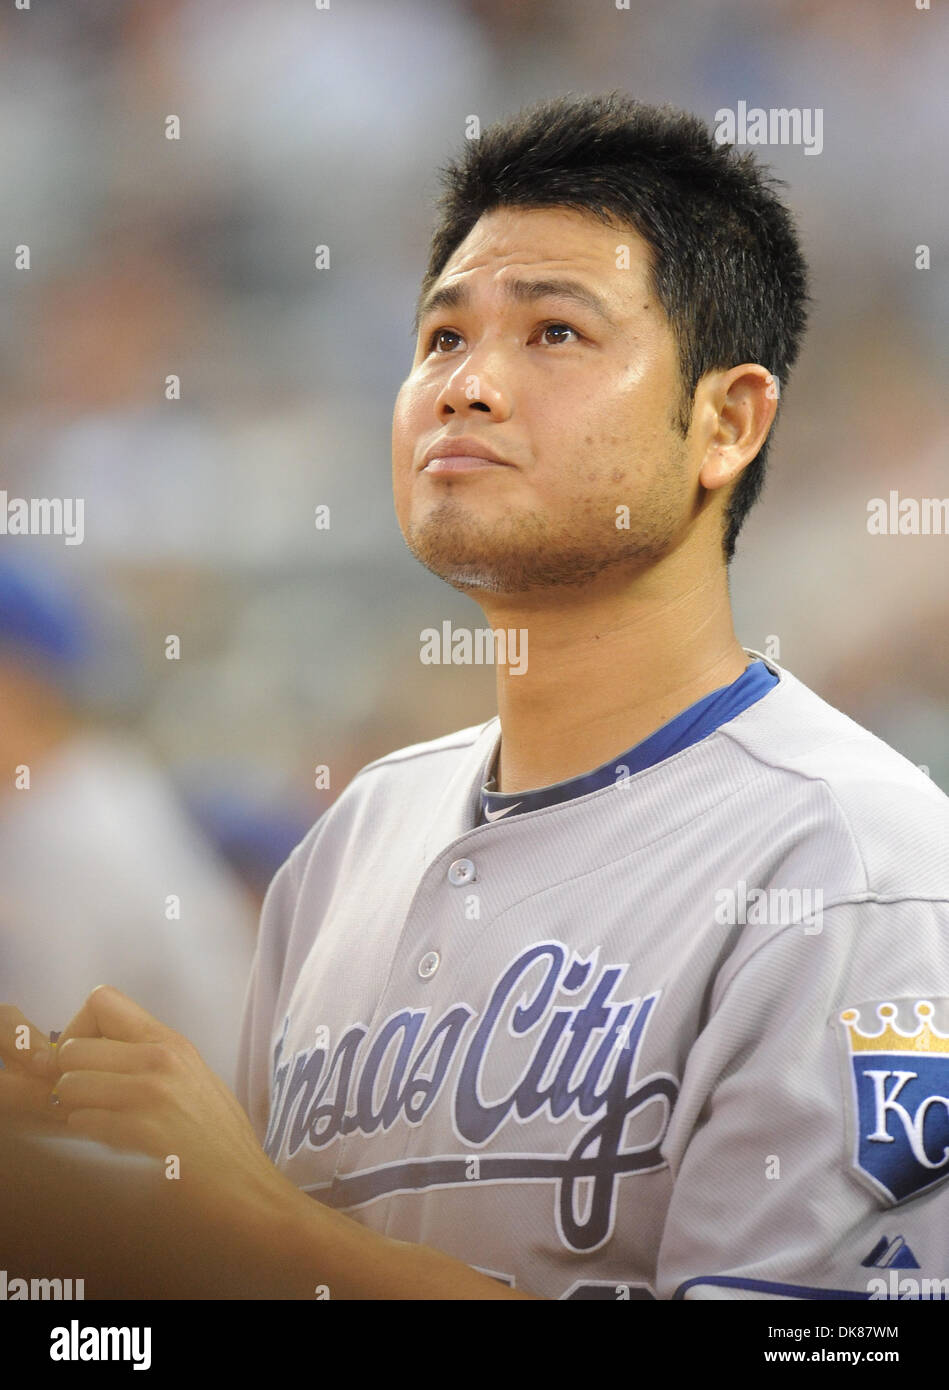 July 14, 2011 - Minneapolis, Minnesota, United States of America - July 14, 2011: Kansas City Royals pitcher Bruce Chen (52) in the dugout during the 4th inning of the game between Minnesota Twins and Kansas City Royals at Target Field in Minneapolis, Minnesota. (Credit Image: © Marilyn Indahl/Southcreek Global/ZUMAPRESS.com) Stock Photo